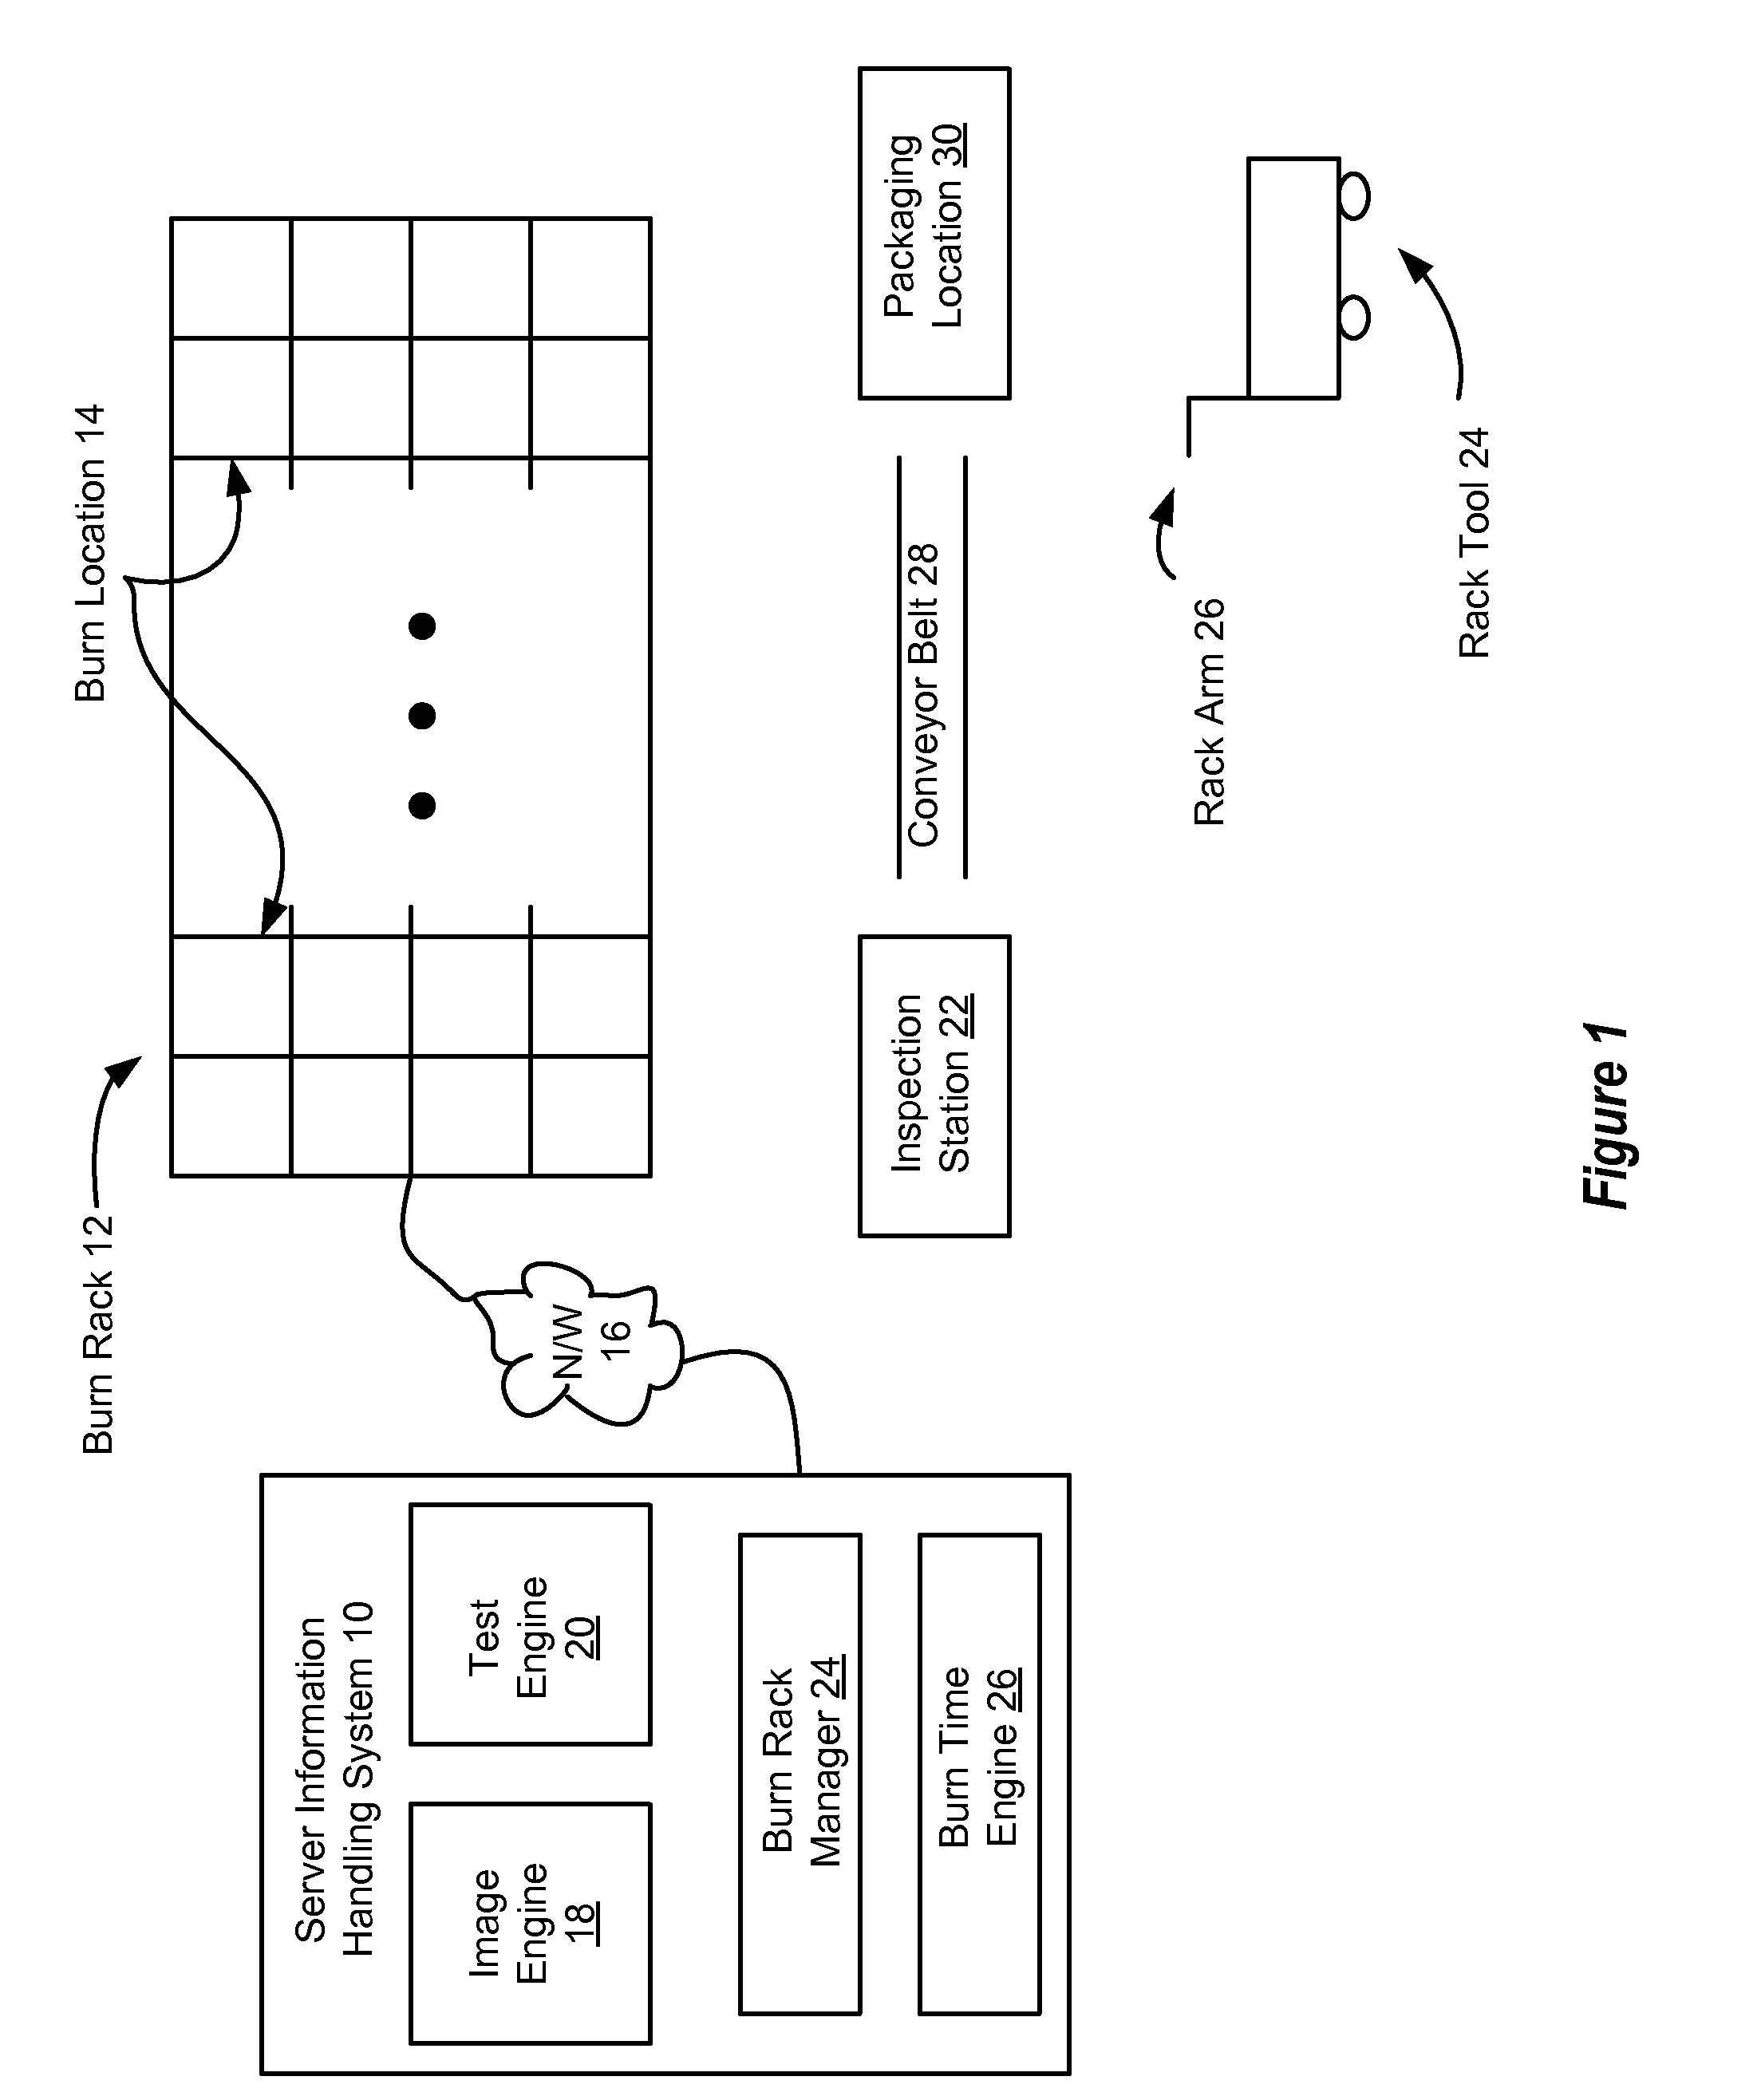 System and method for cascade information handling system manufacture